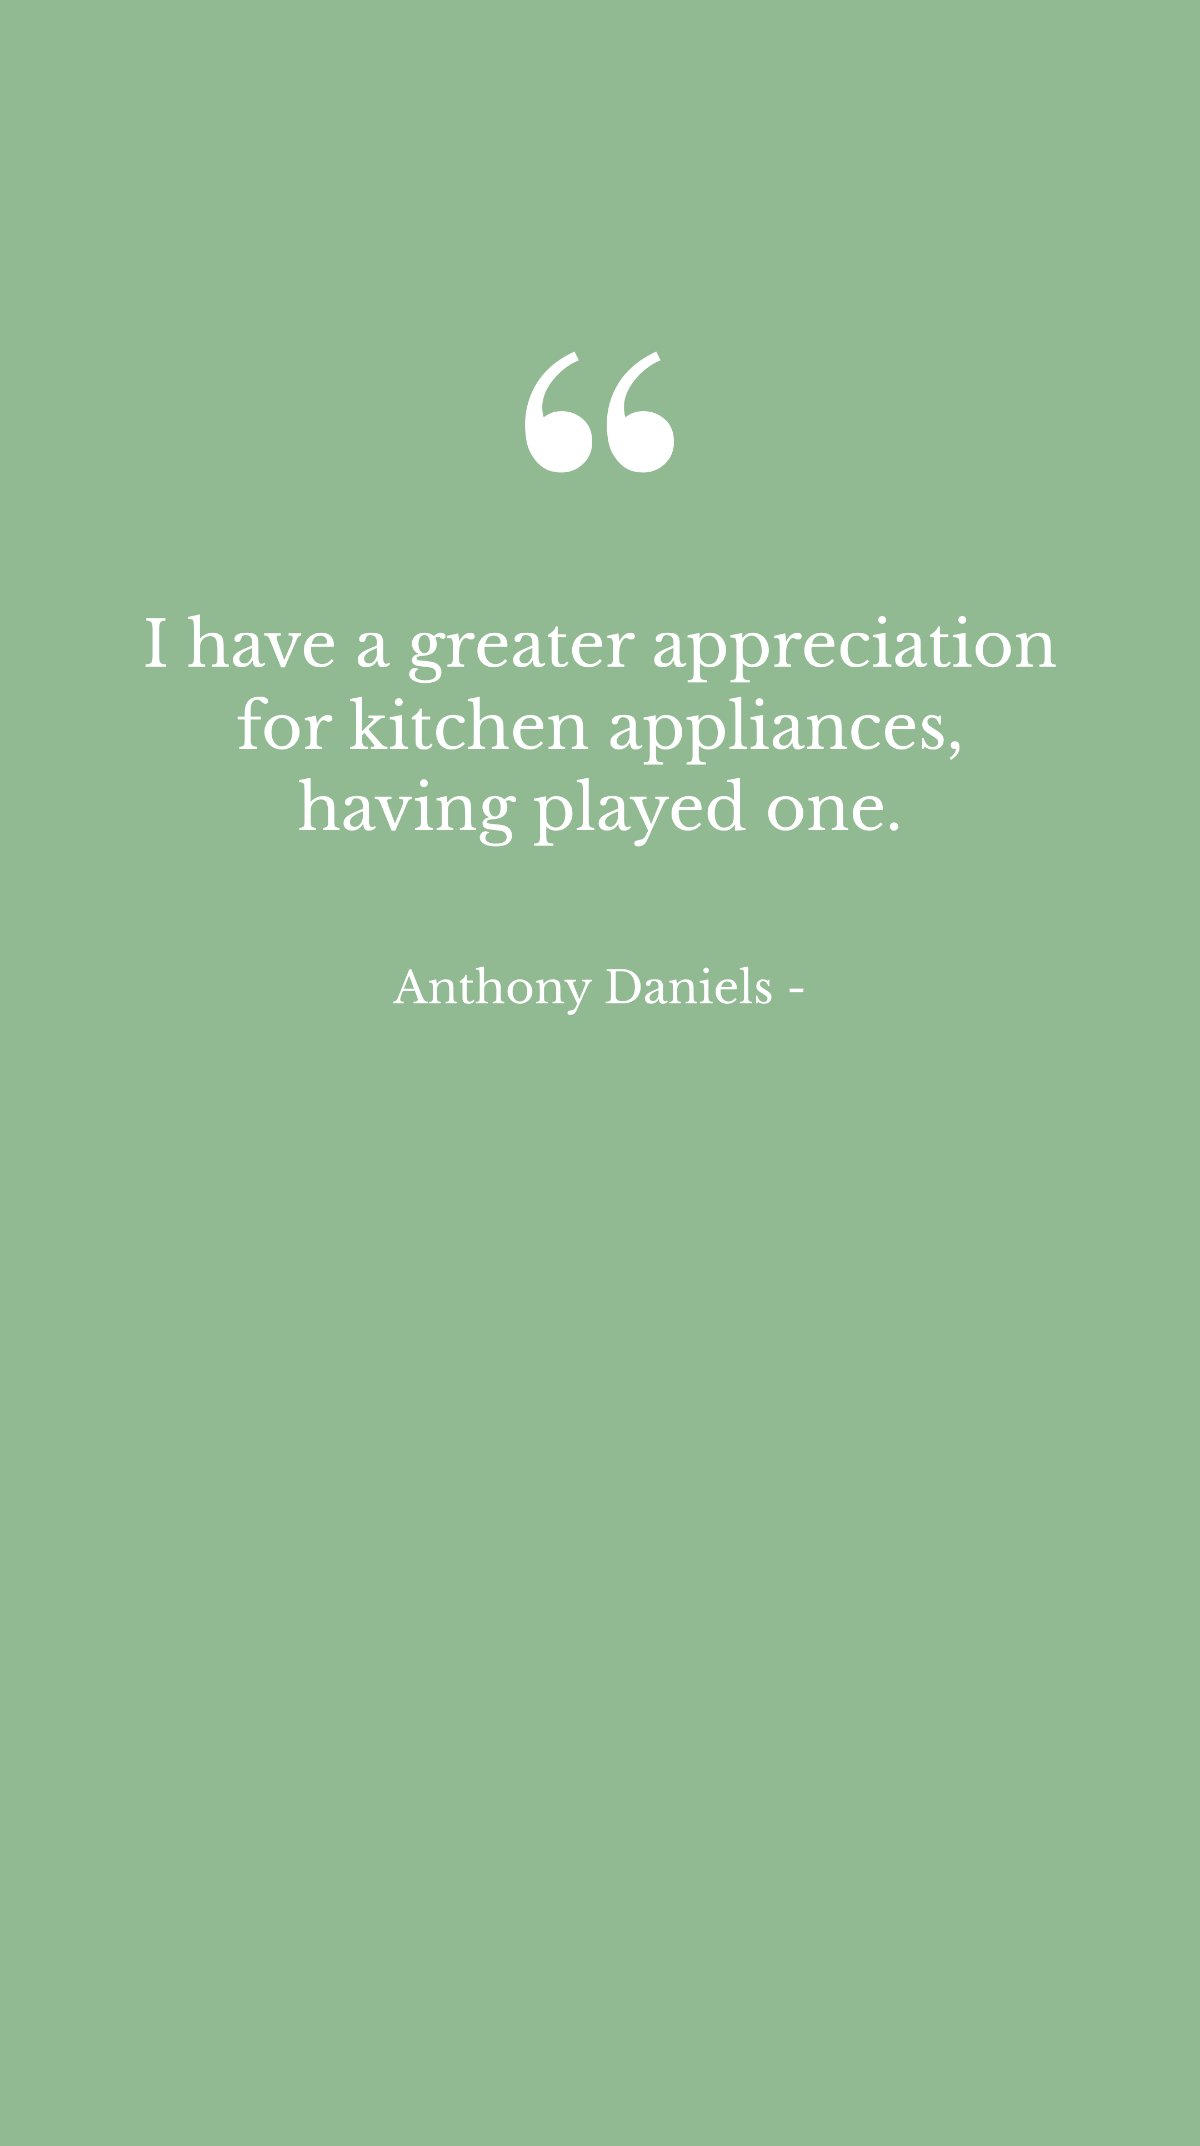 Free Anthony Daniels - I have a greater appreciation for kitchen appliances, having played one. Template